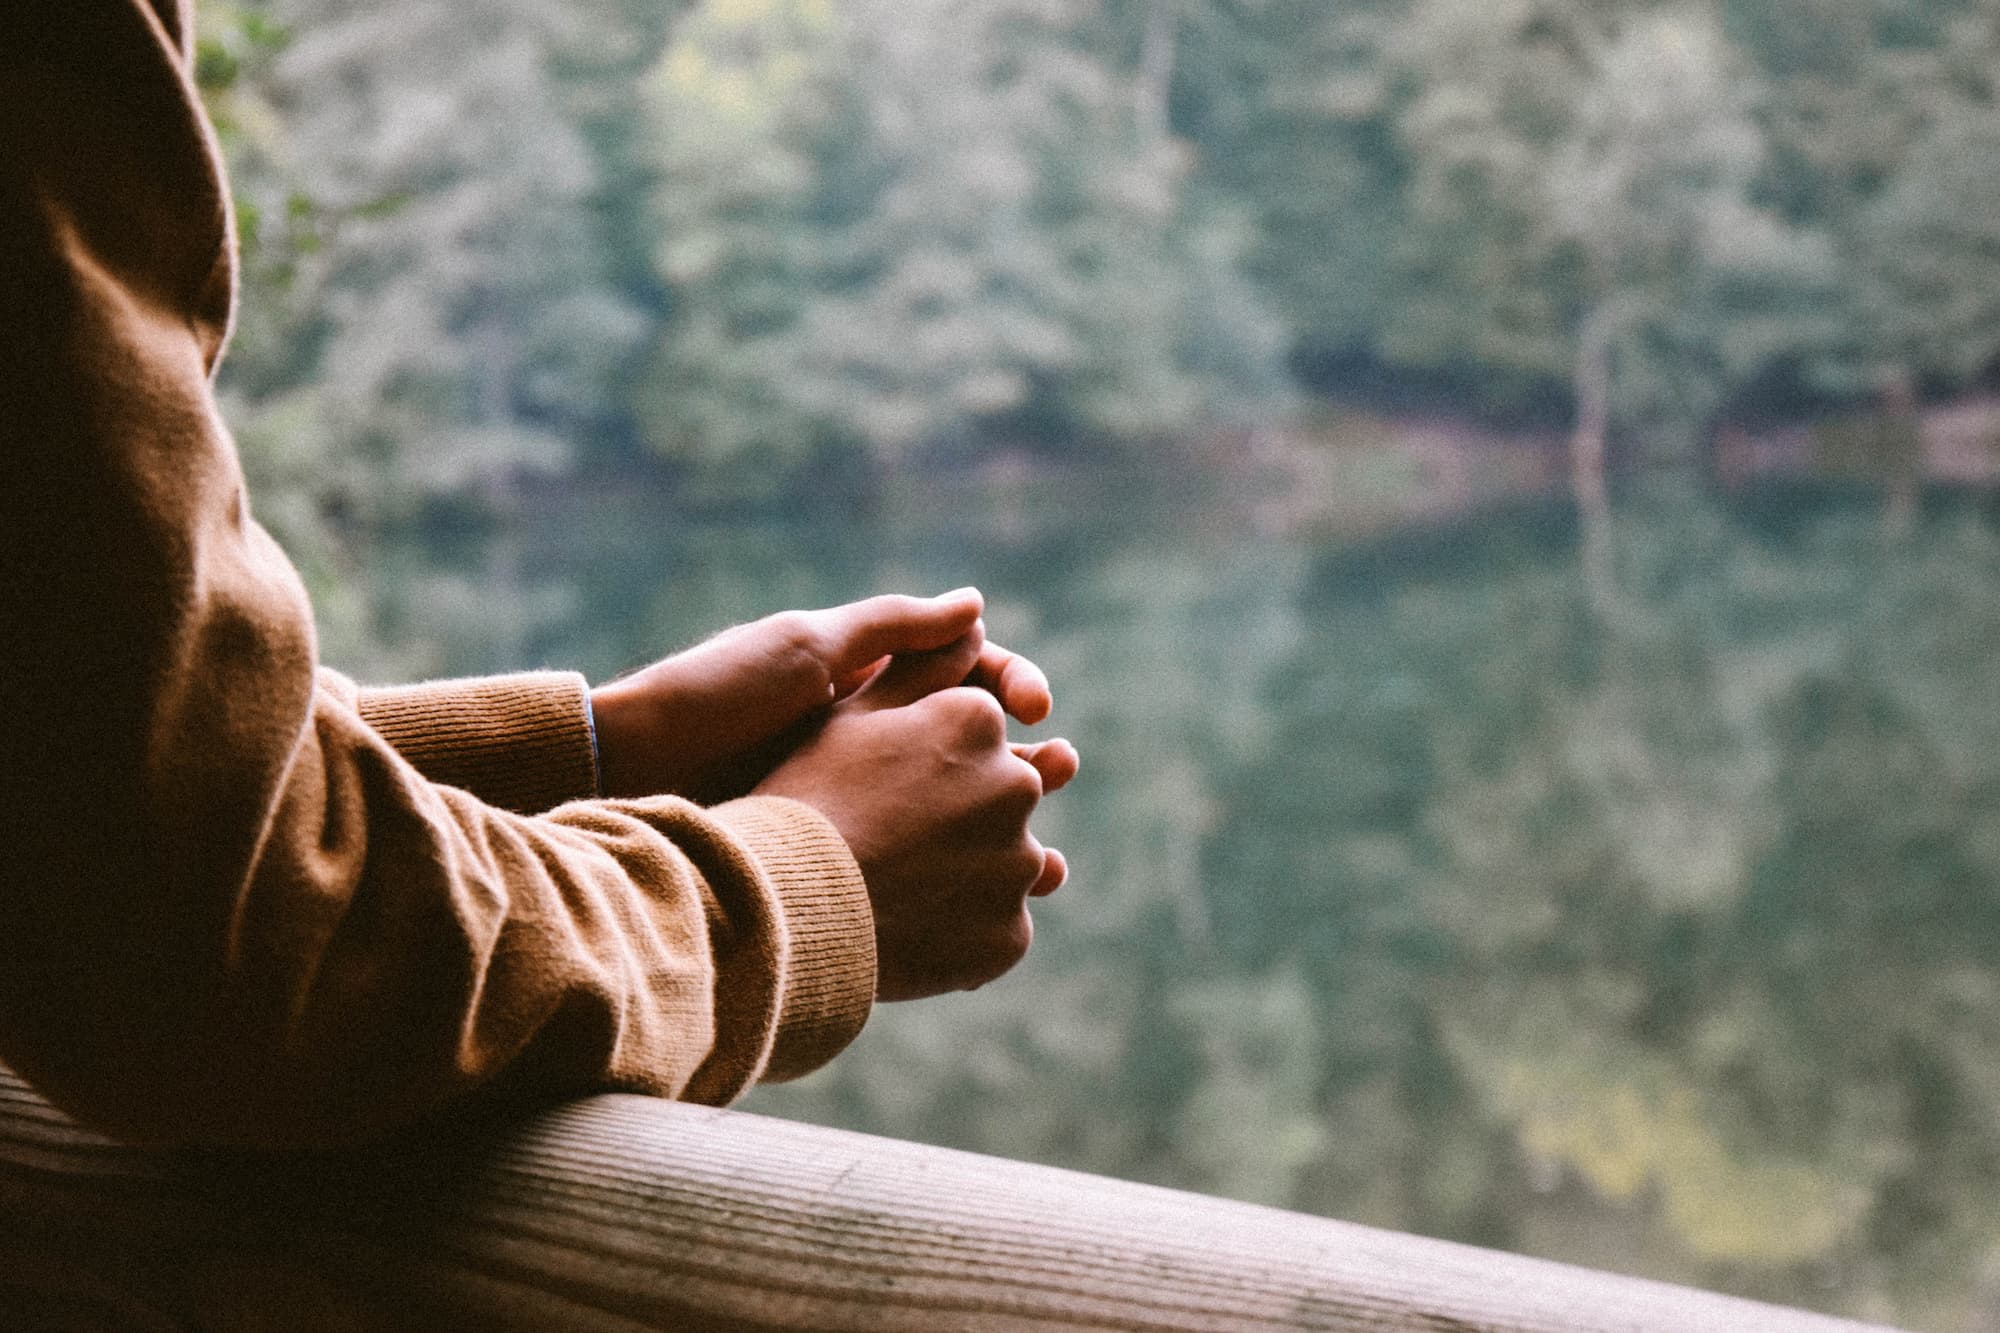 A person holding its own hands and gazing at the landscape